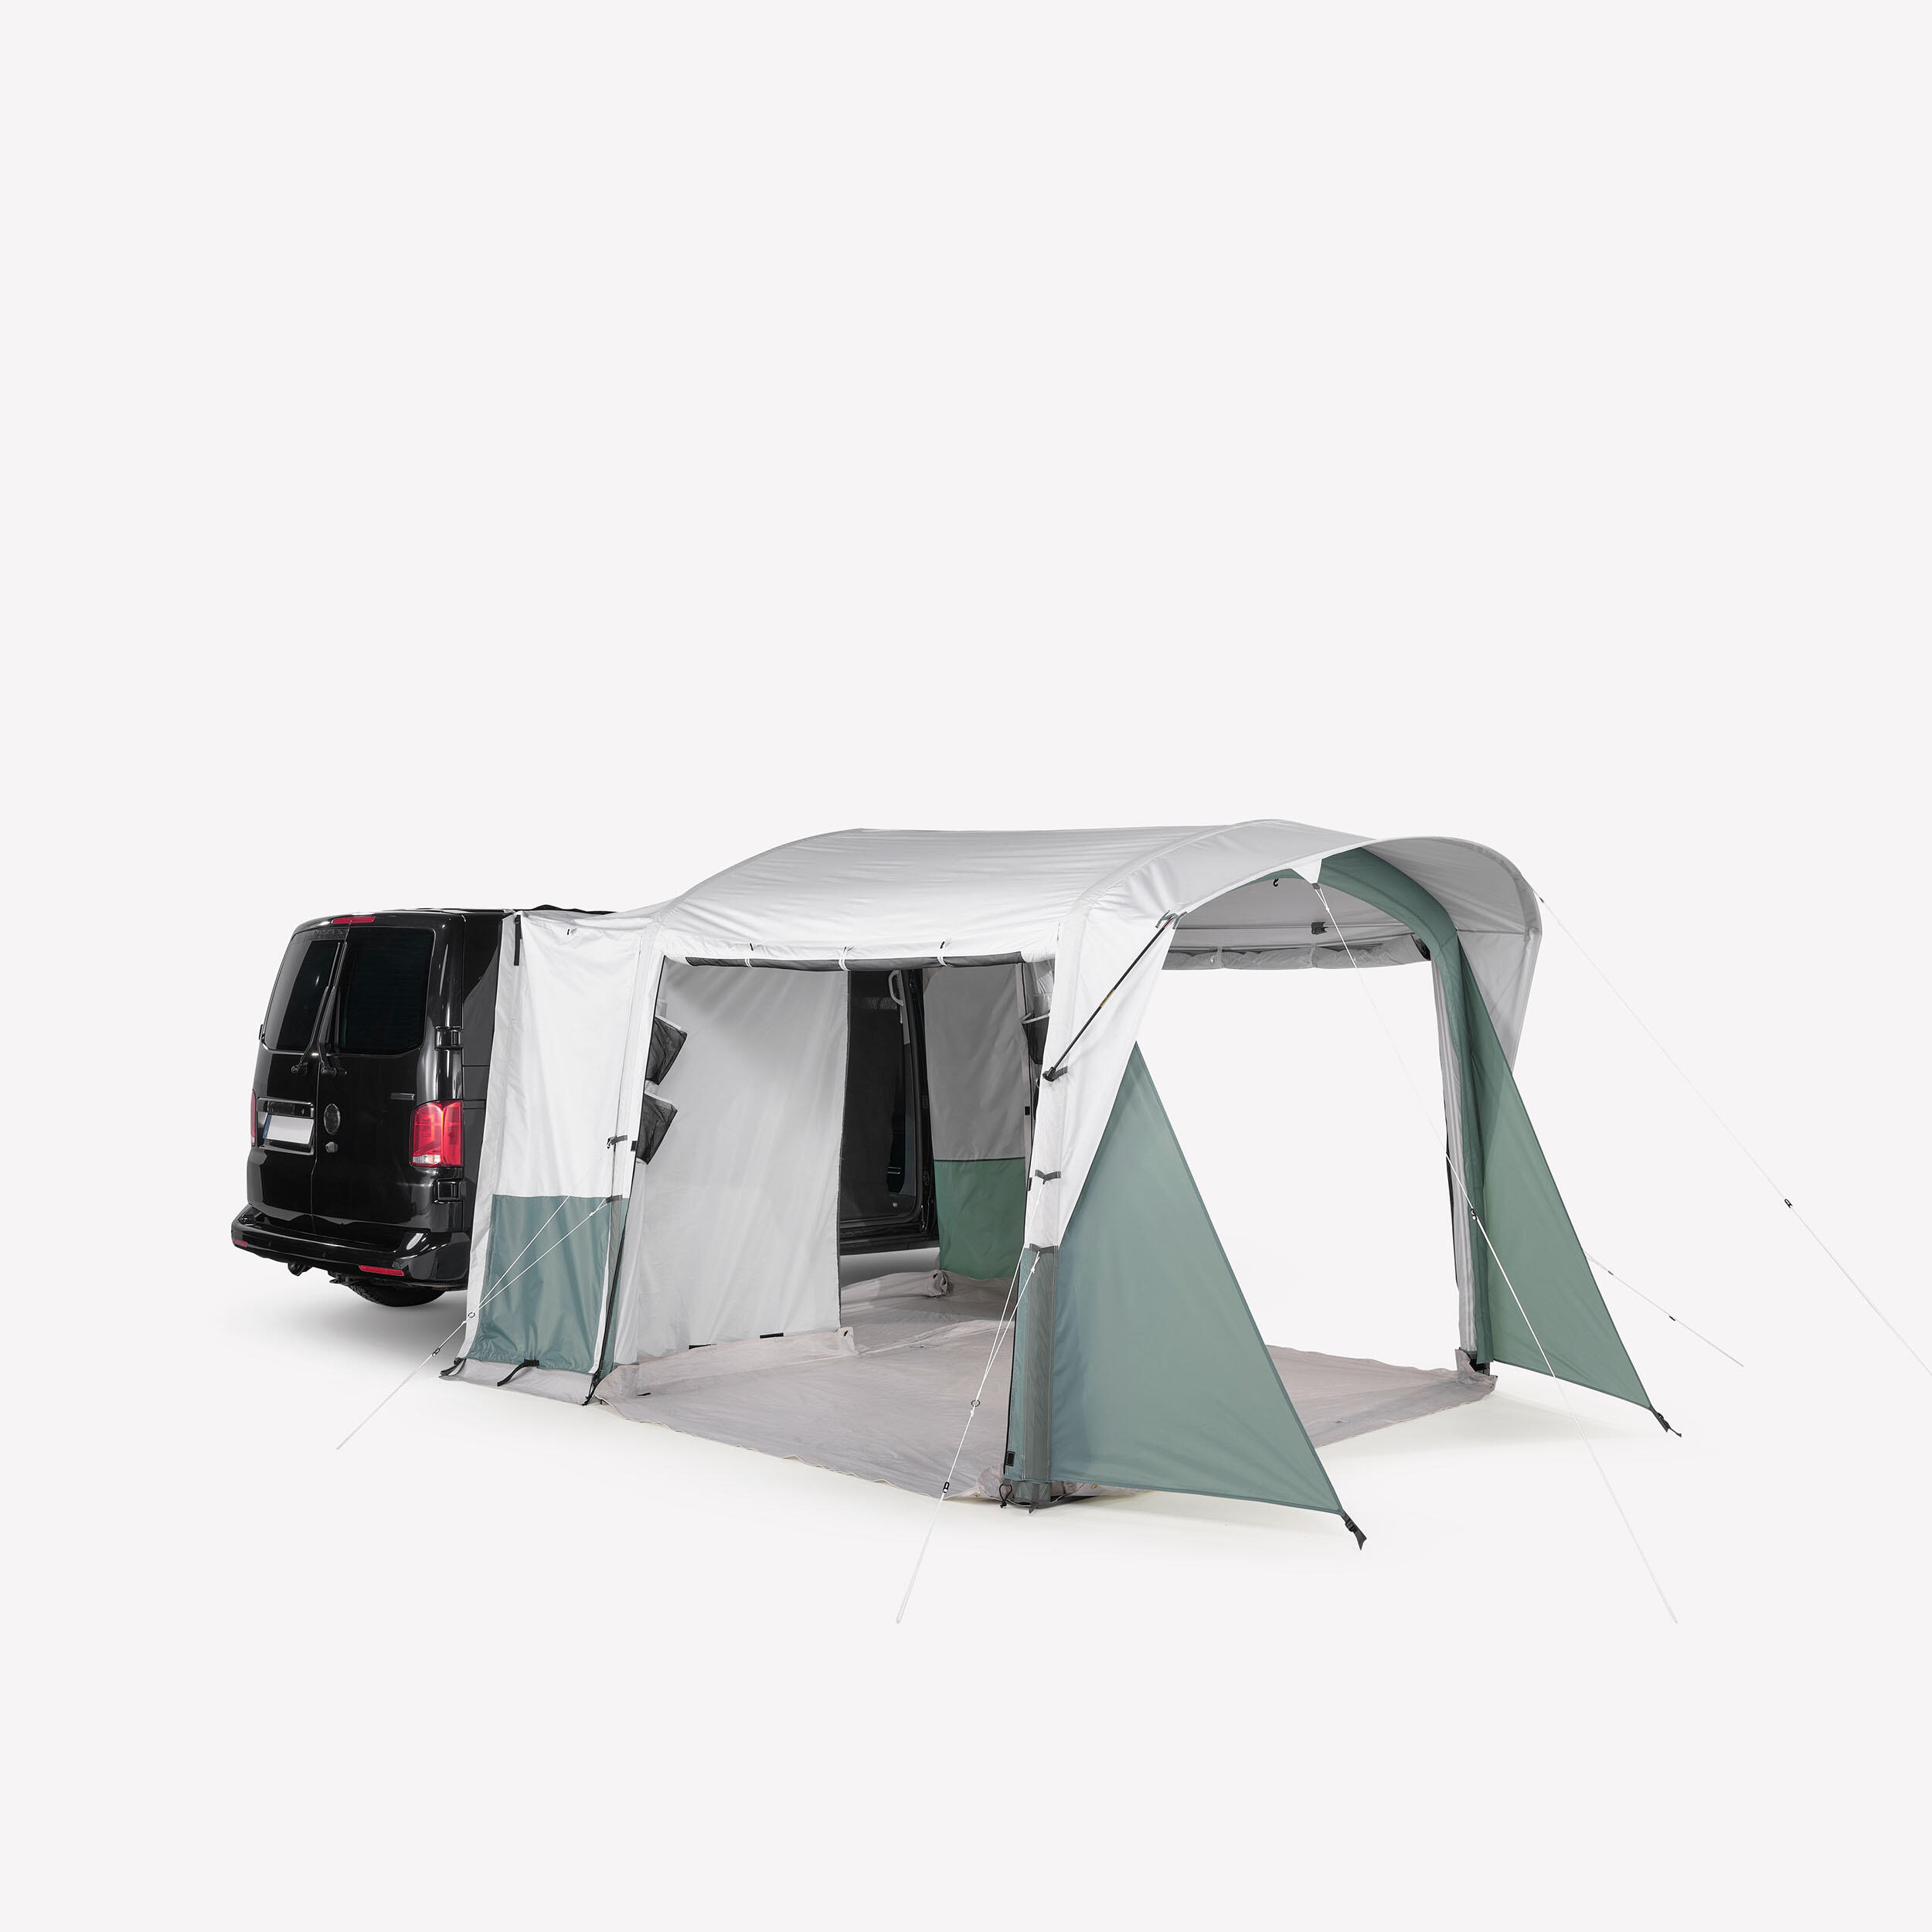 Van and truck inflatable canopy - Van Connect Air Seconds Fresh - 6 people 7/15